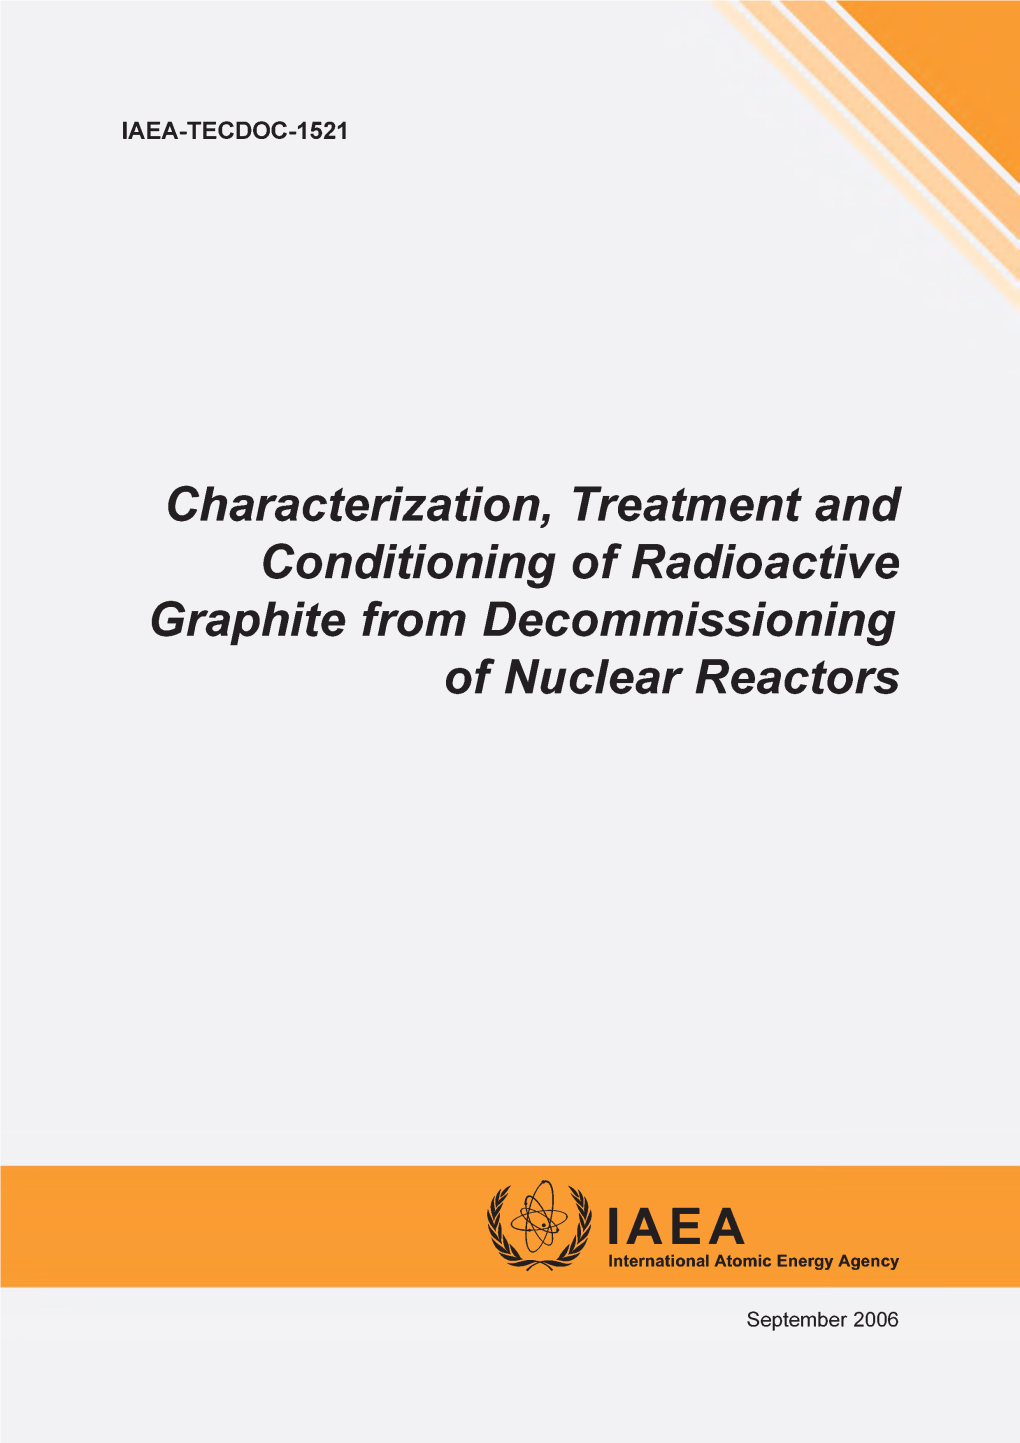 Characterization, Treatment and Conditioning of Radioactive Graphite from Decommissioning of Nuclear Reactors